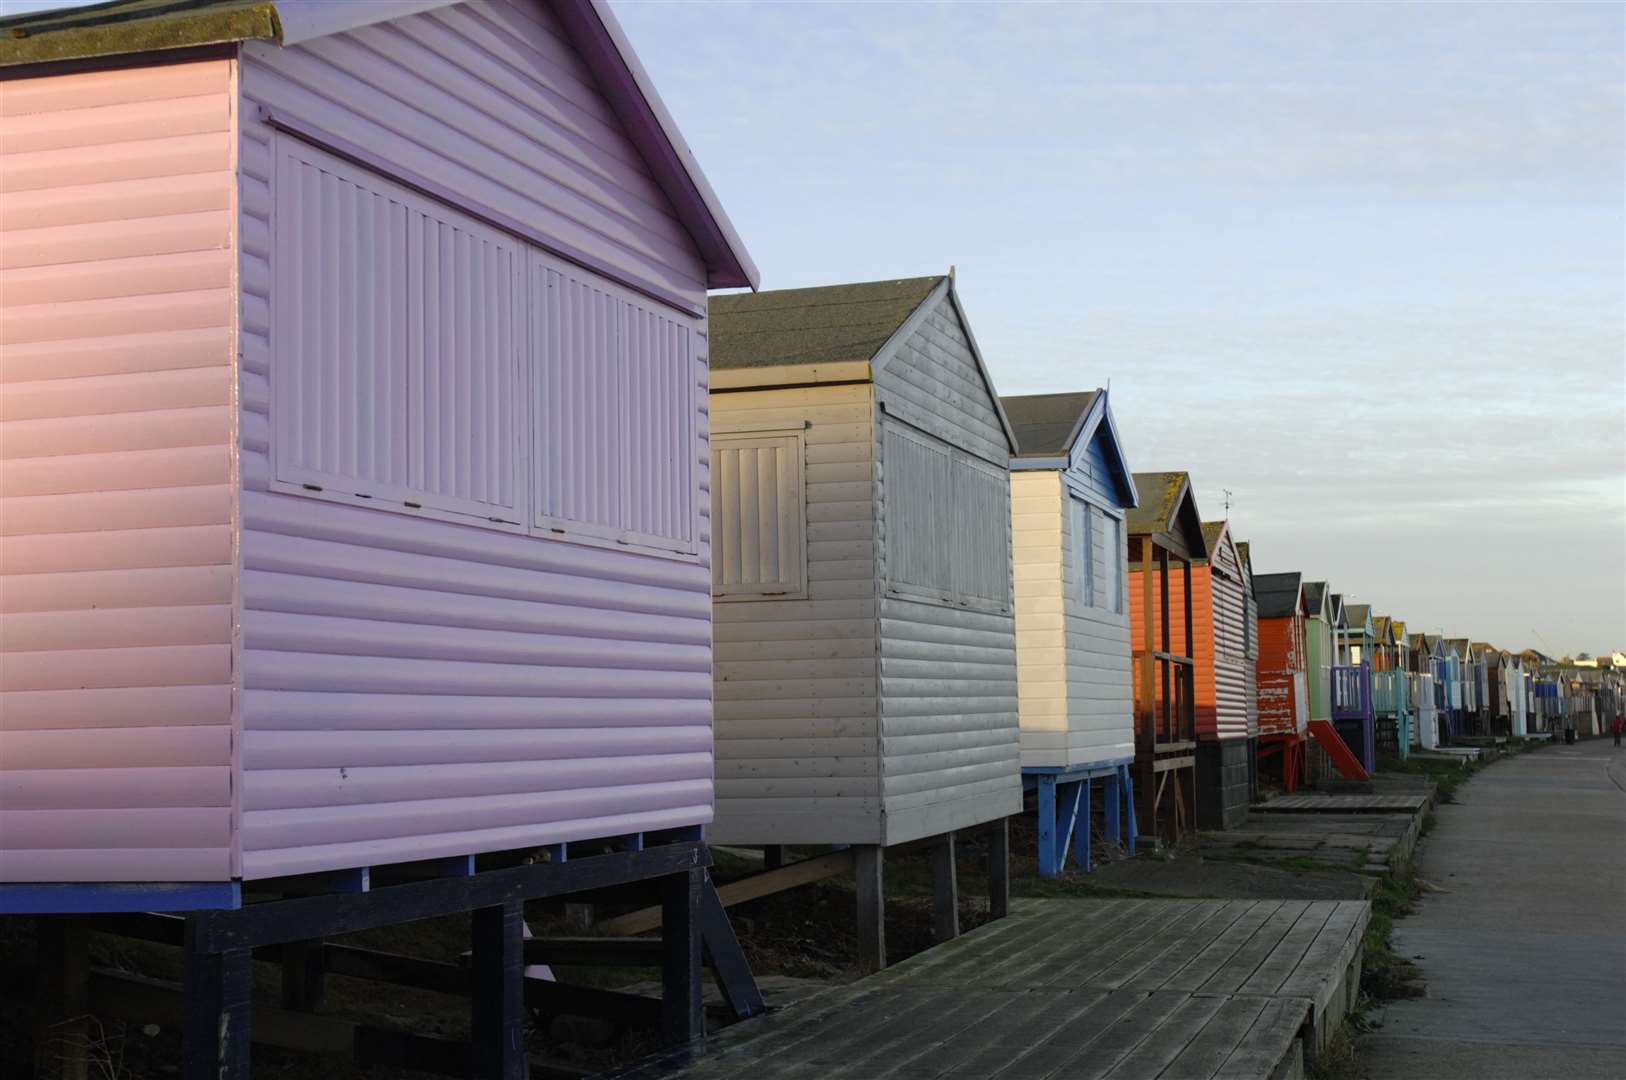 Council bosses hope to build 20 new beach huts in Tankerton